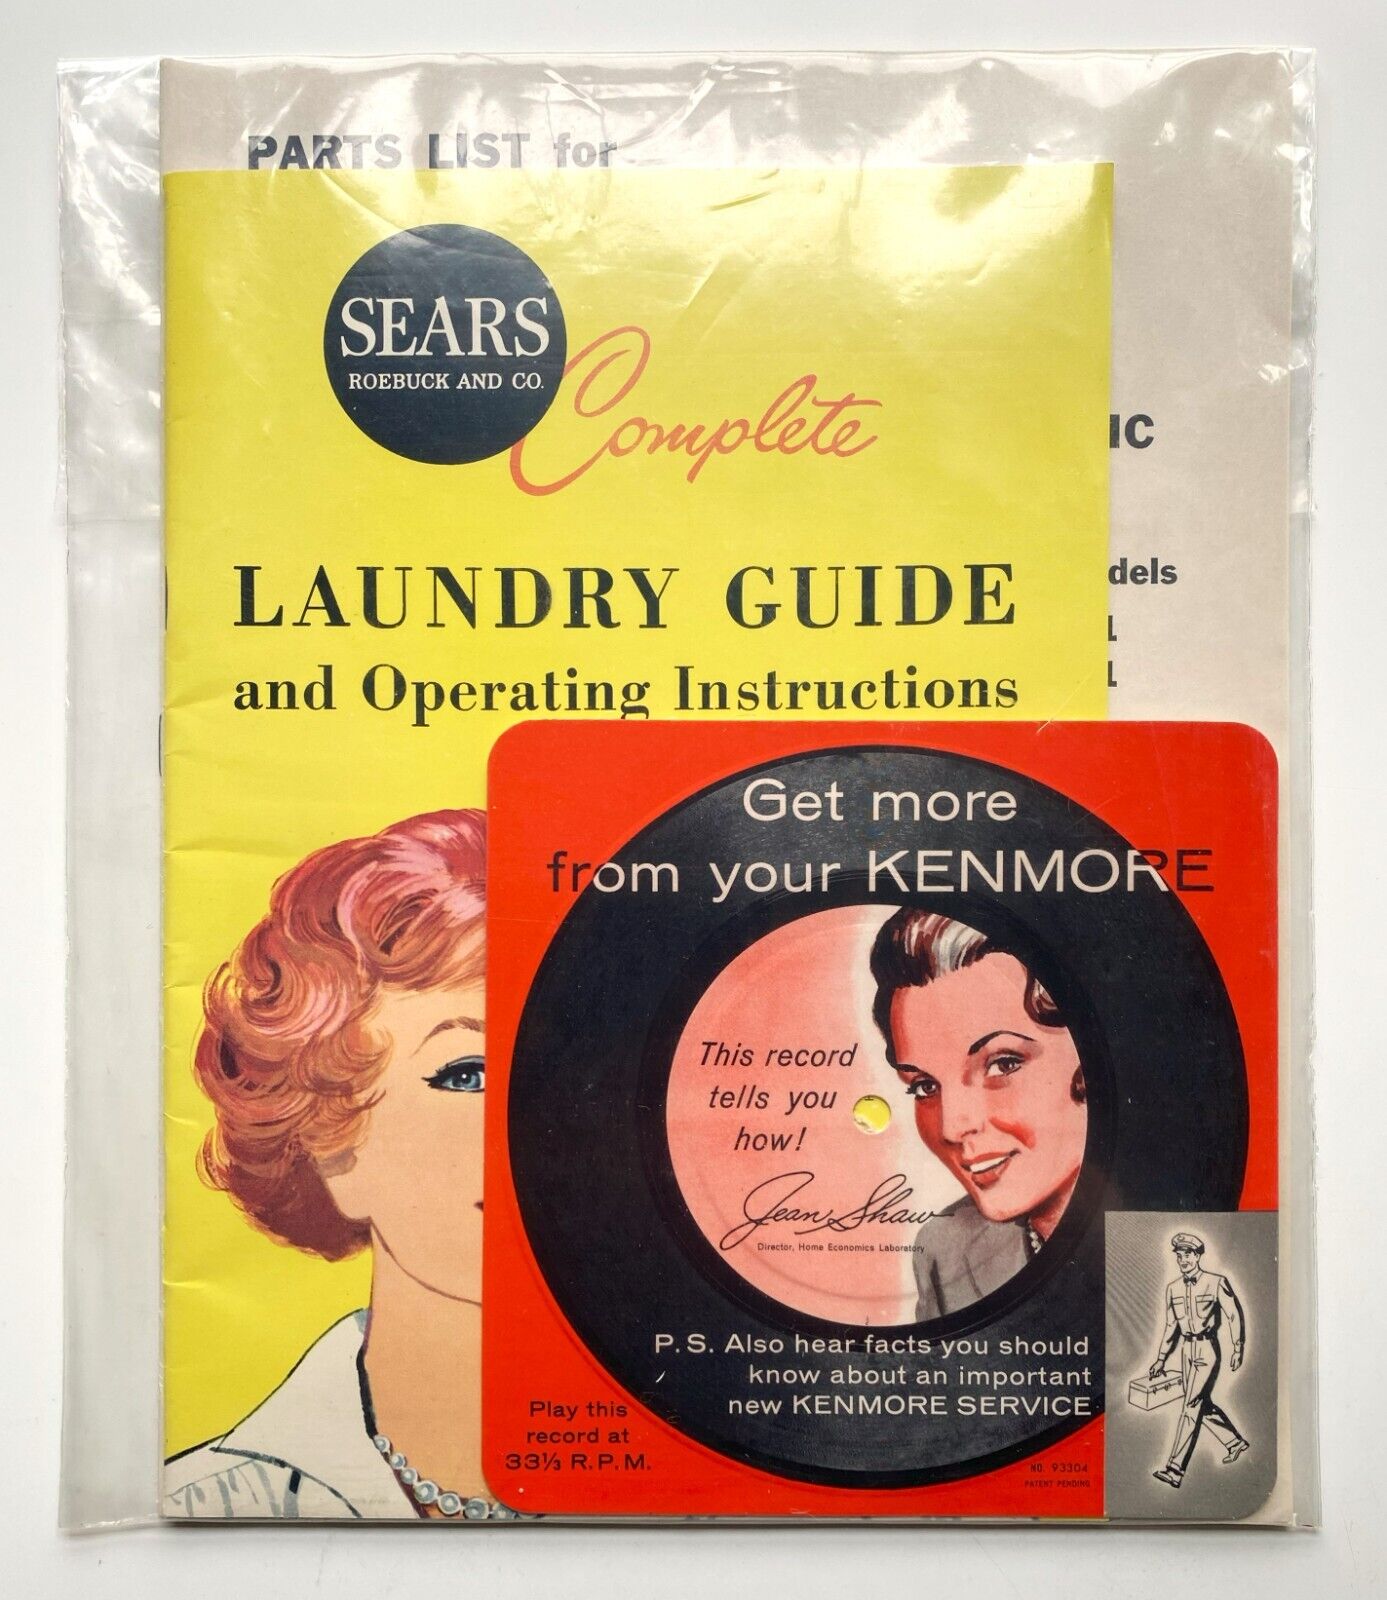 Vintage Sears/Kenmore Washing Machine Laundry Guide/Instructions/Record - 1960's